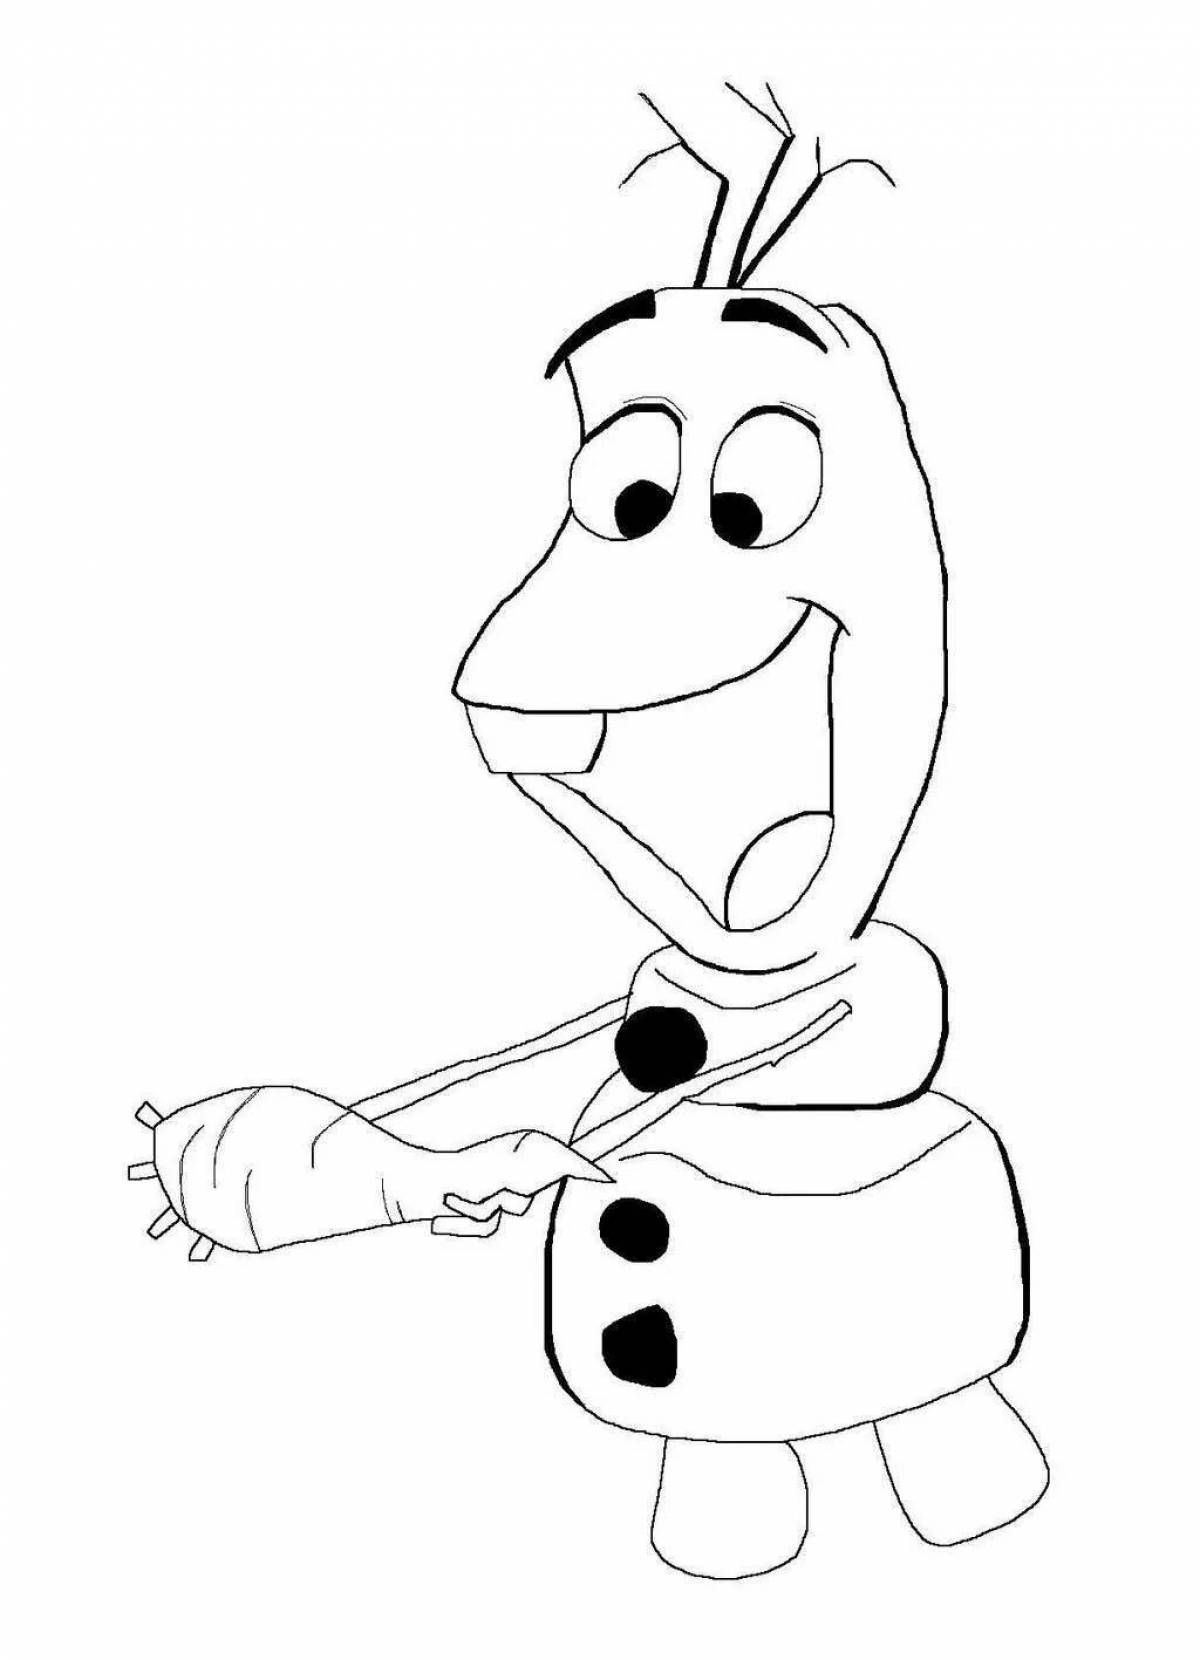 Olaf's Frozen coloring book